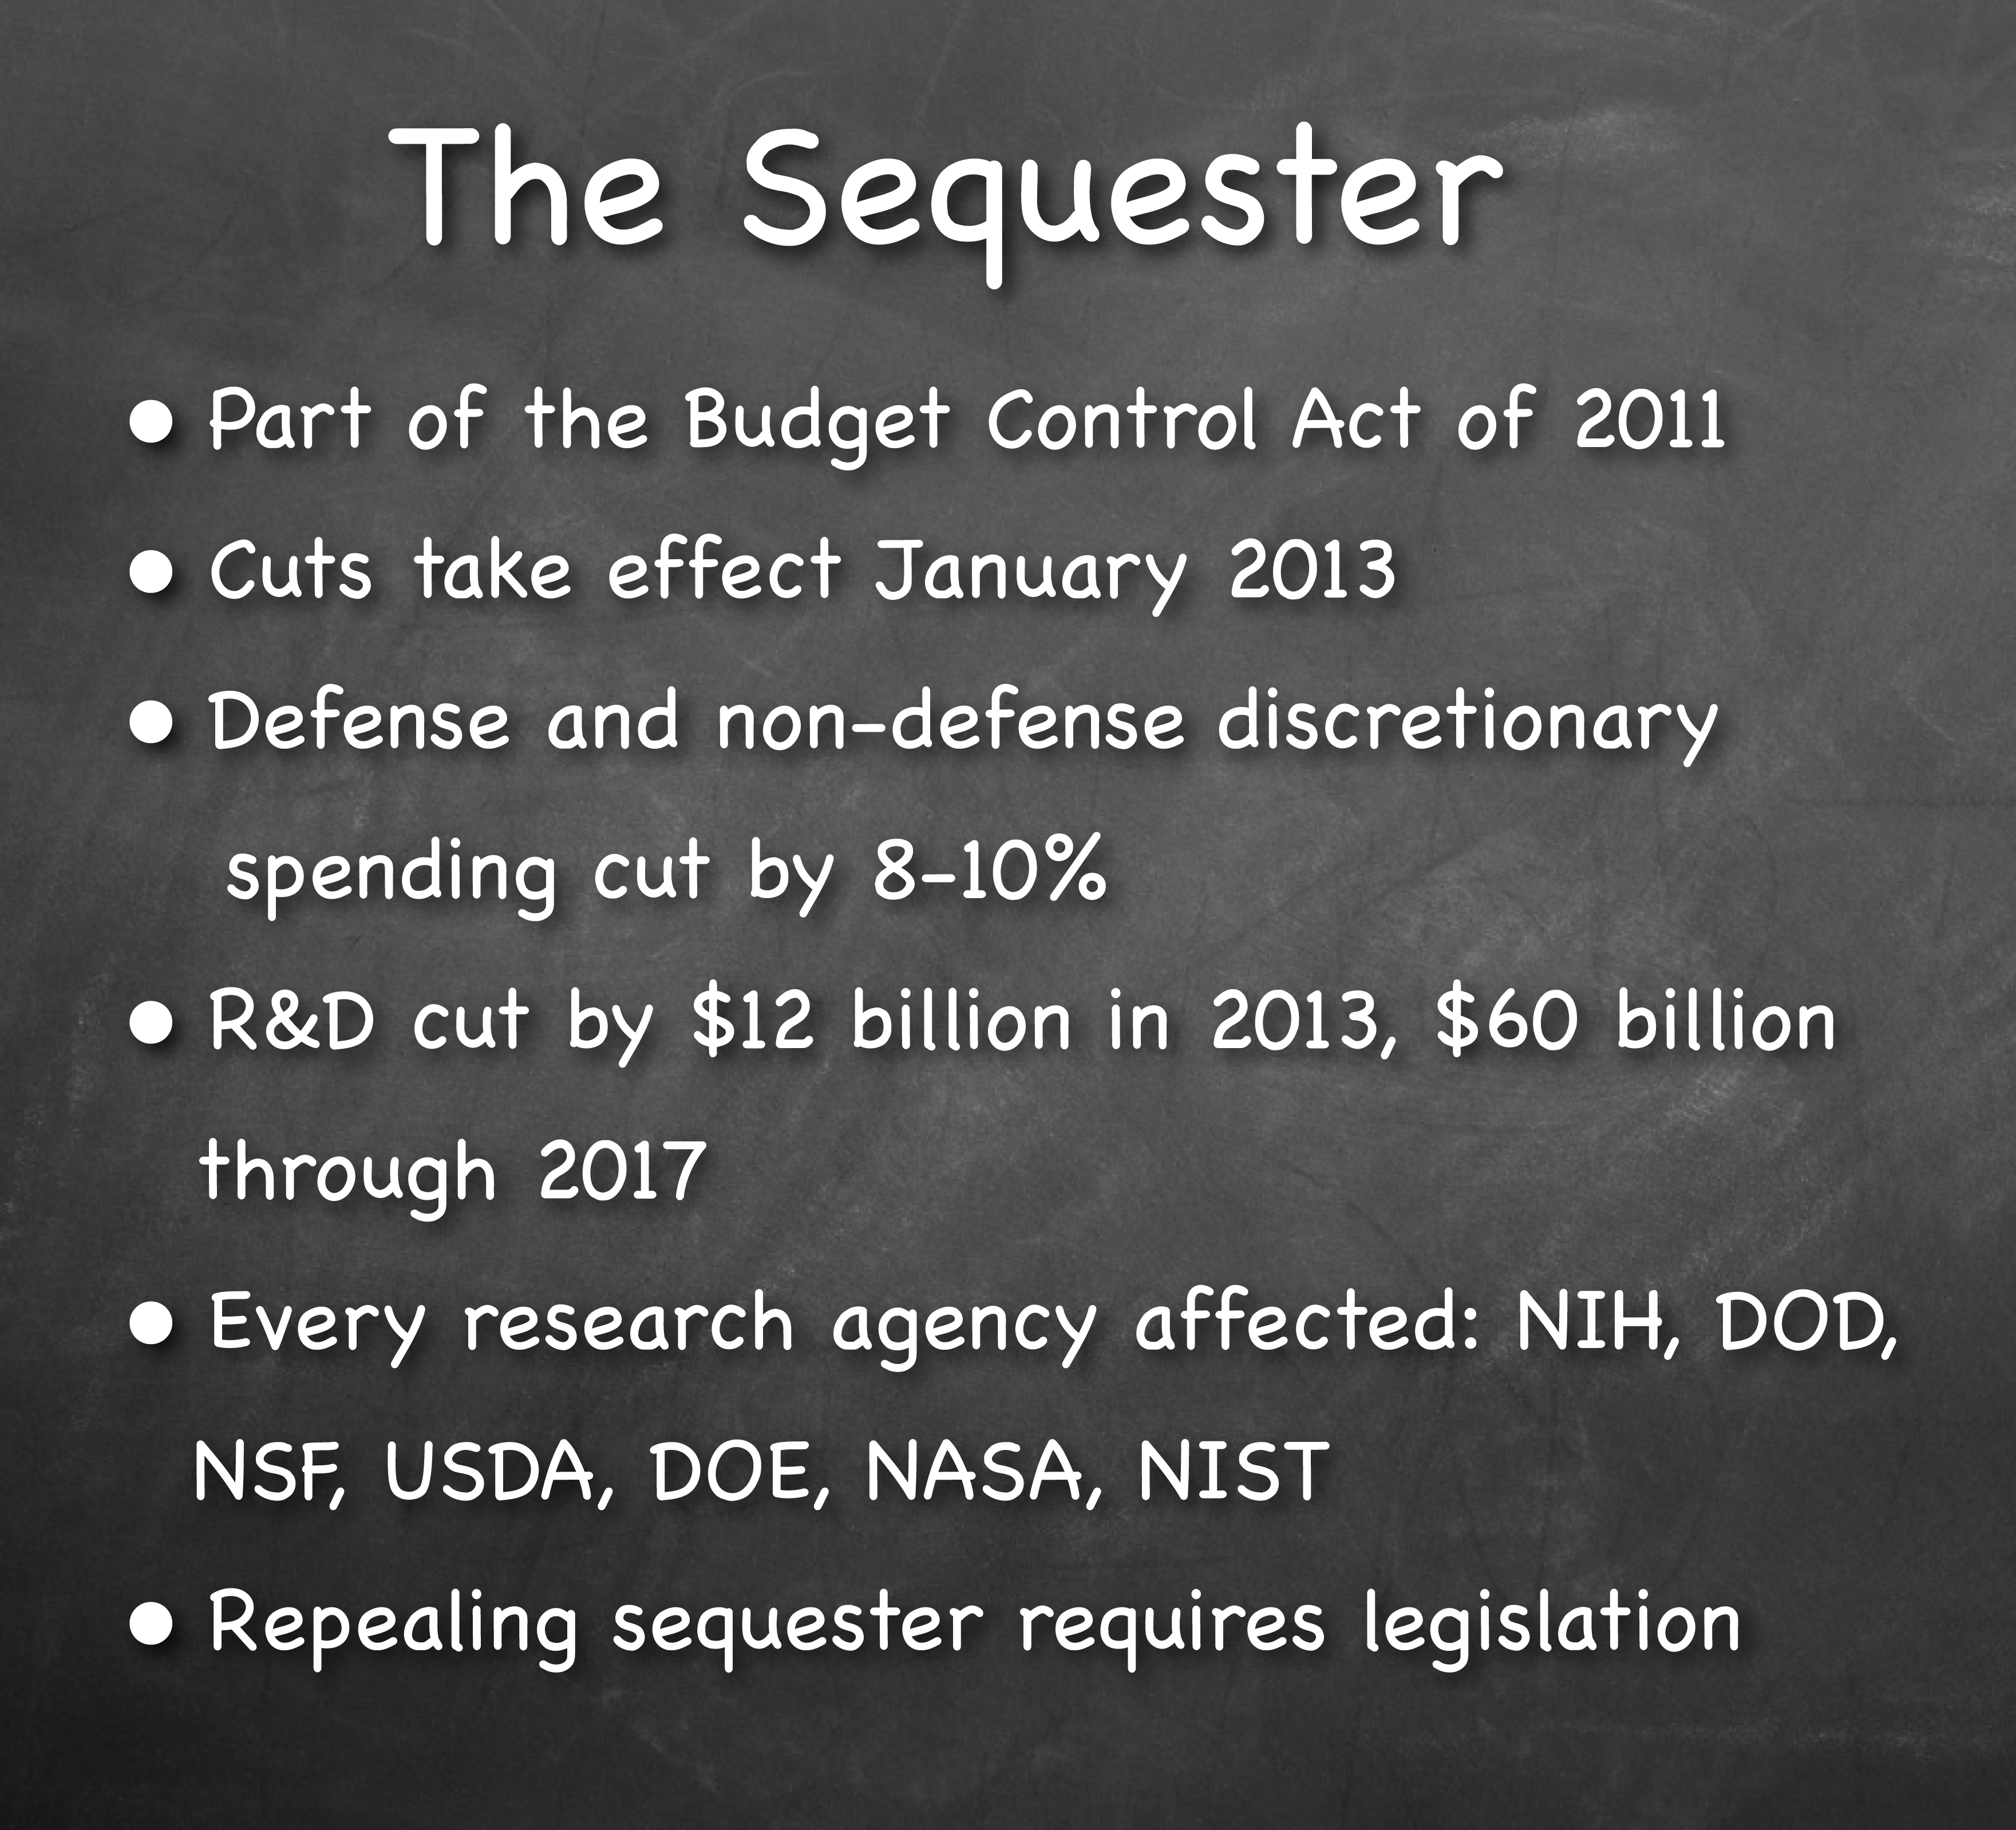 sequester facts side bar box - section 1